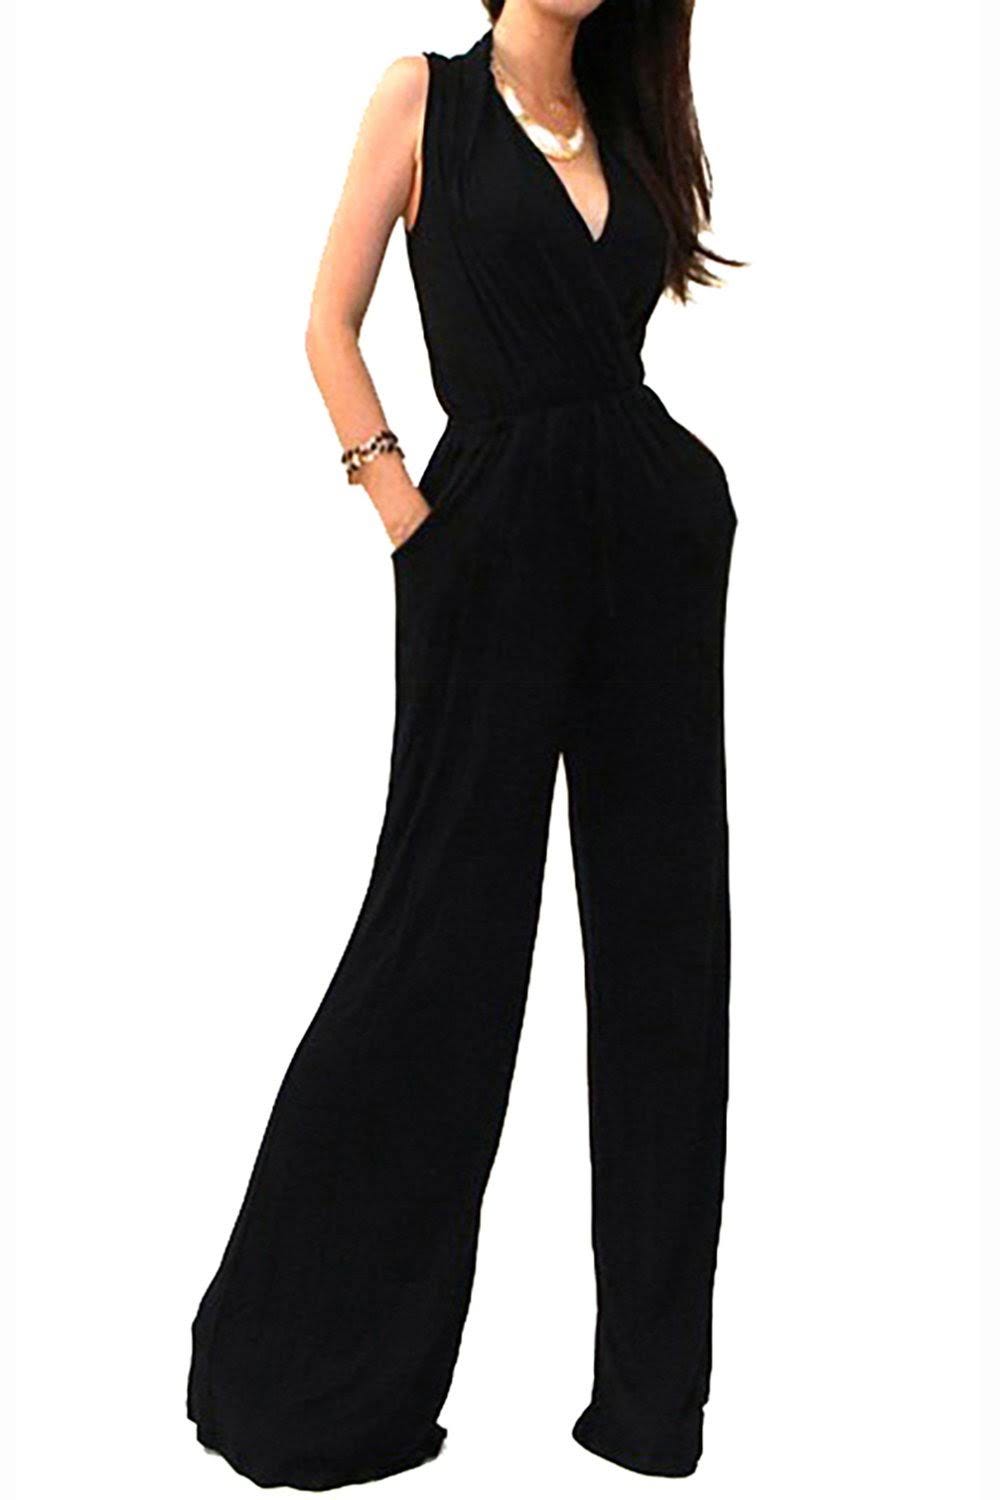 Chic Rayon Jersey Knit Jumpsuit - Made in the USA | Image